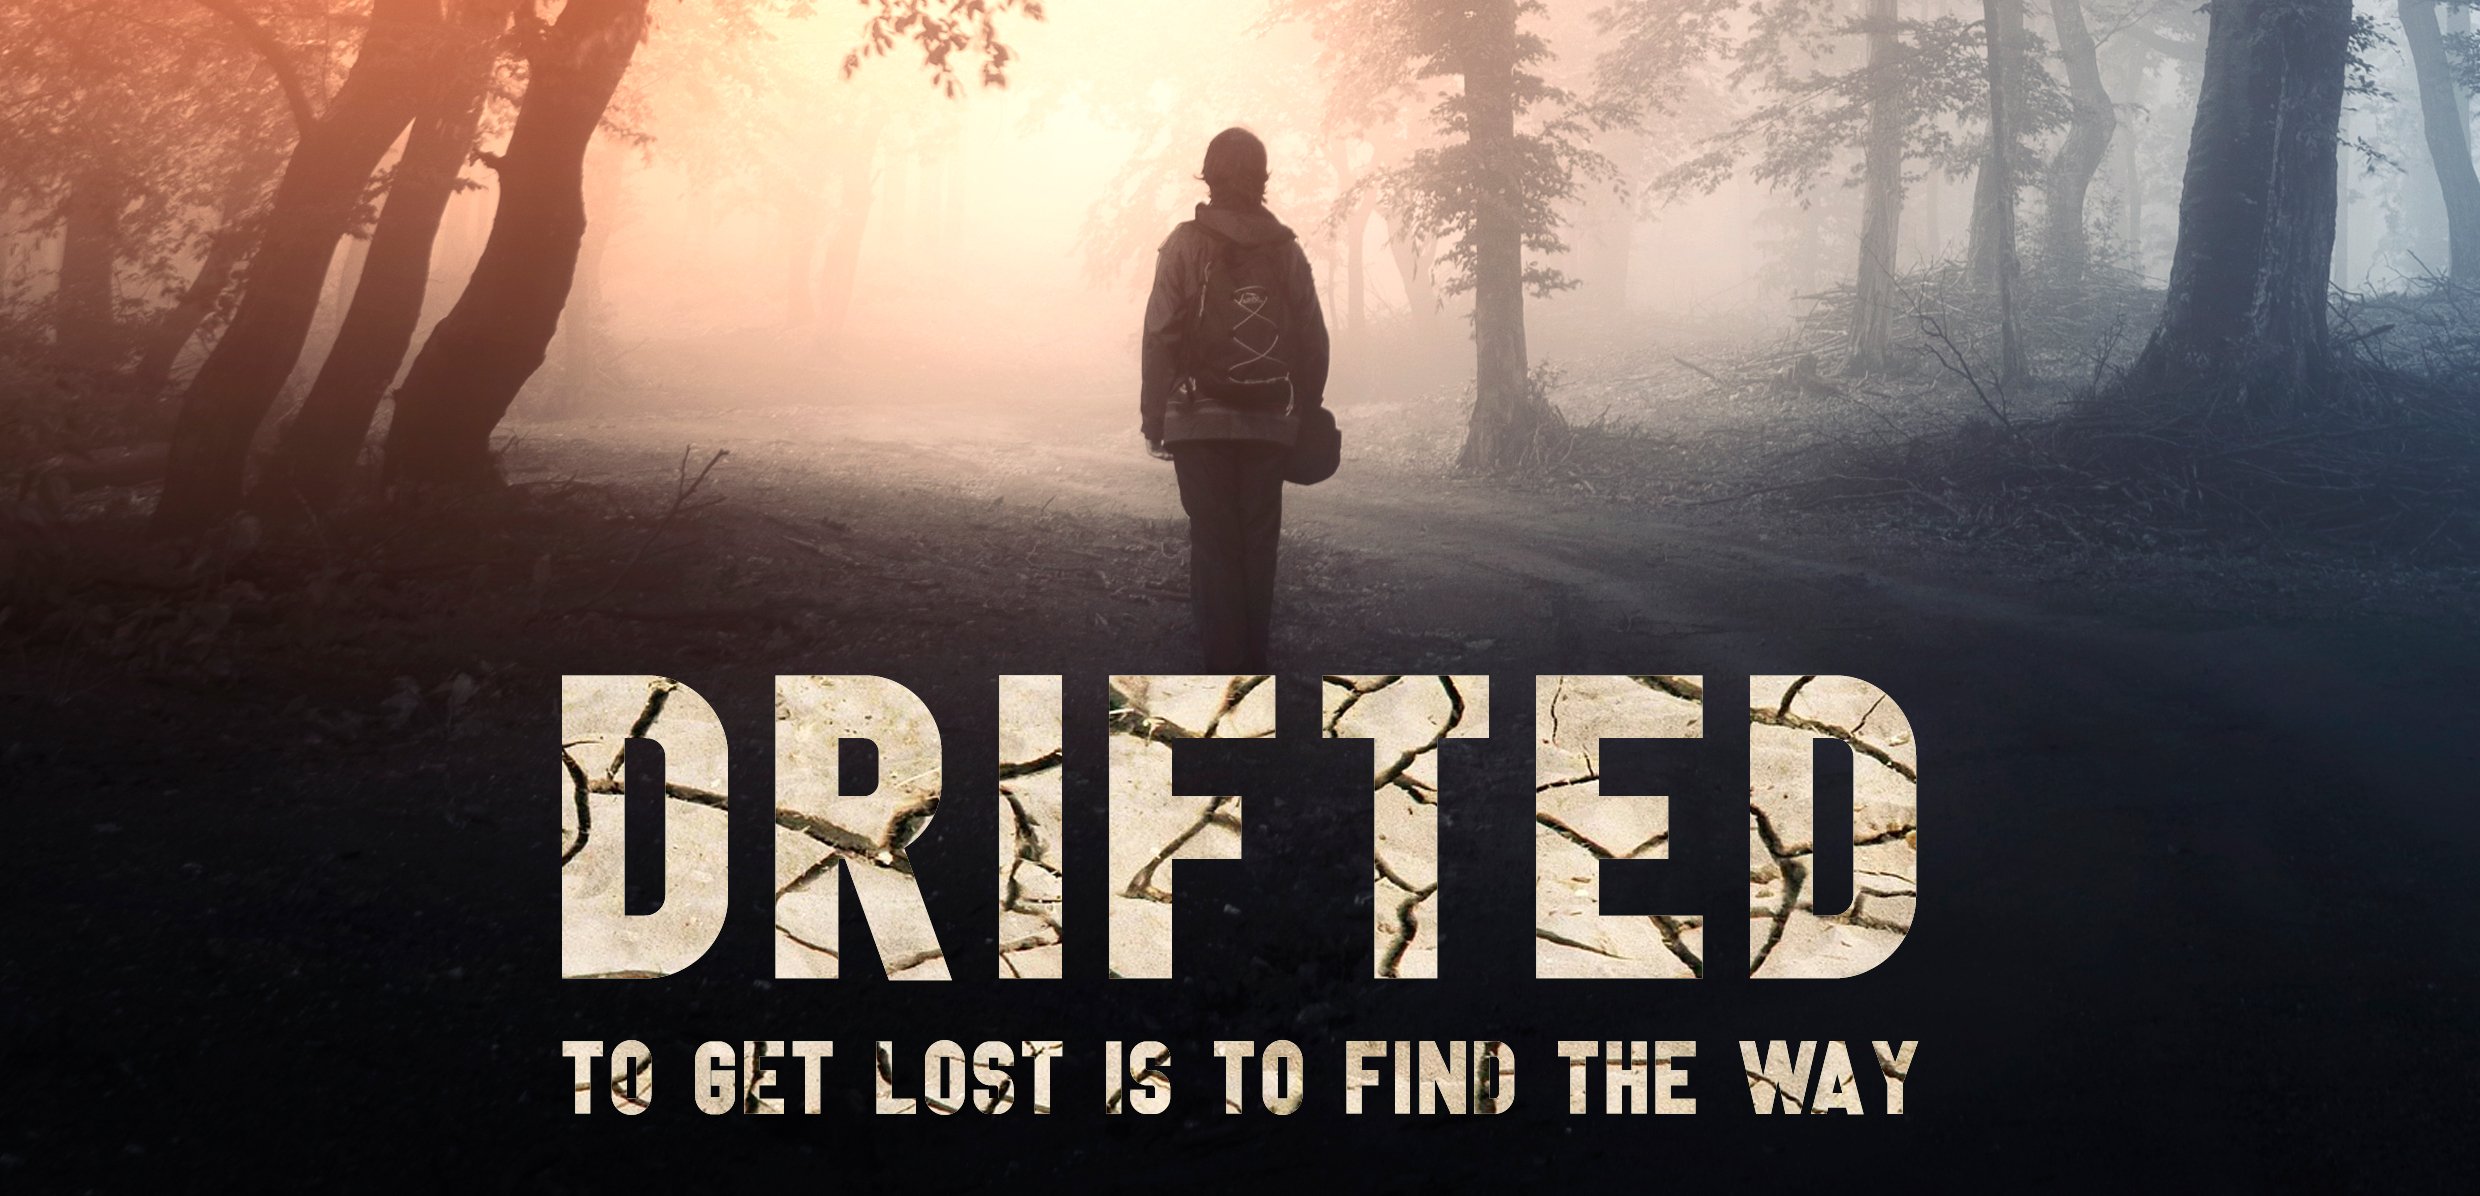 Drifted - To get lost is to find the way